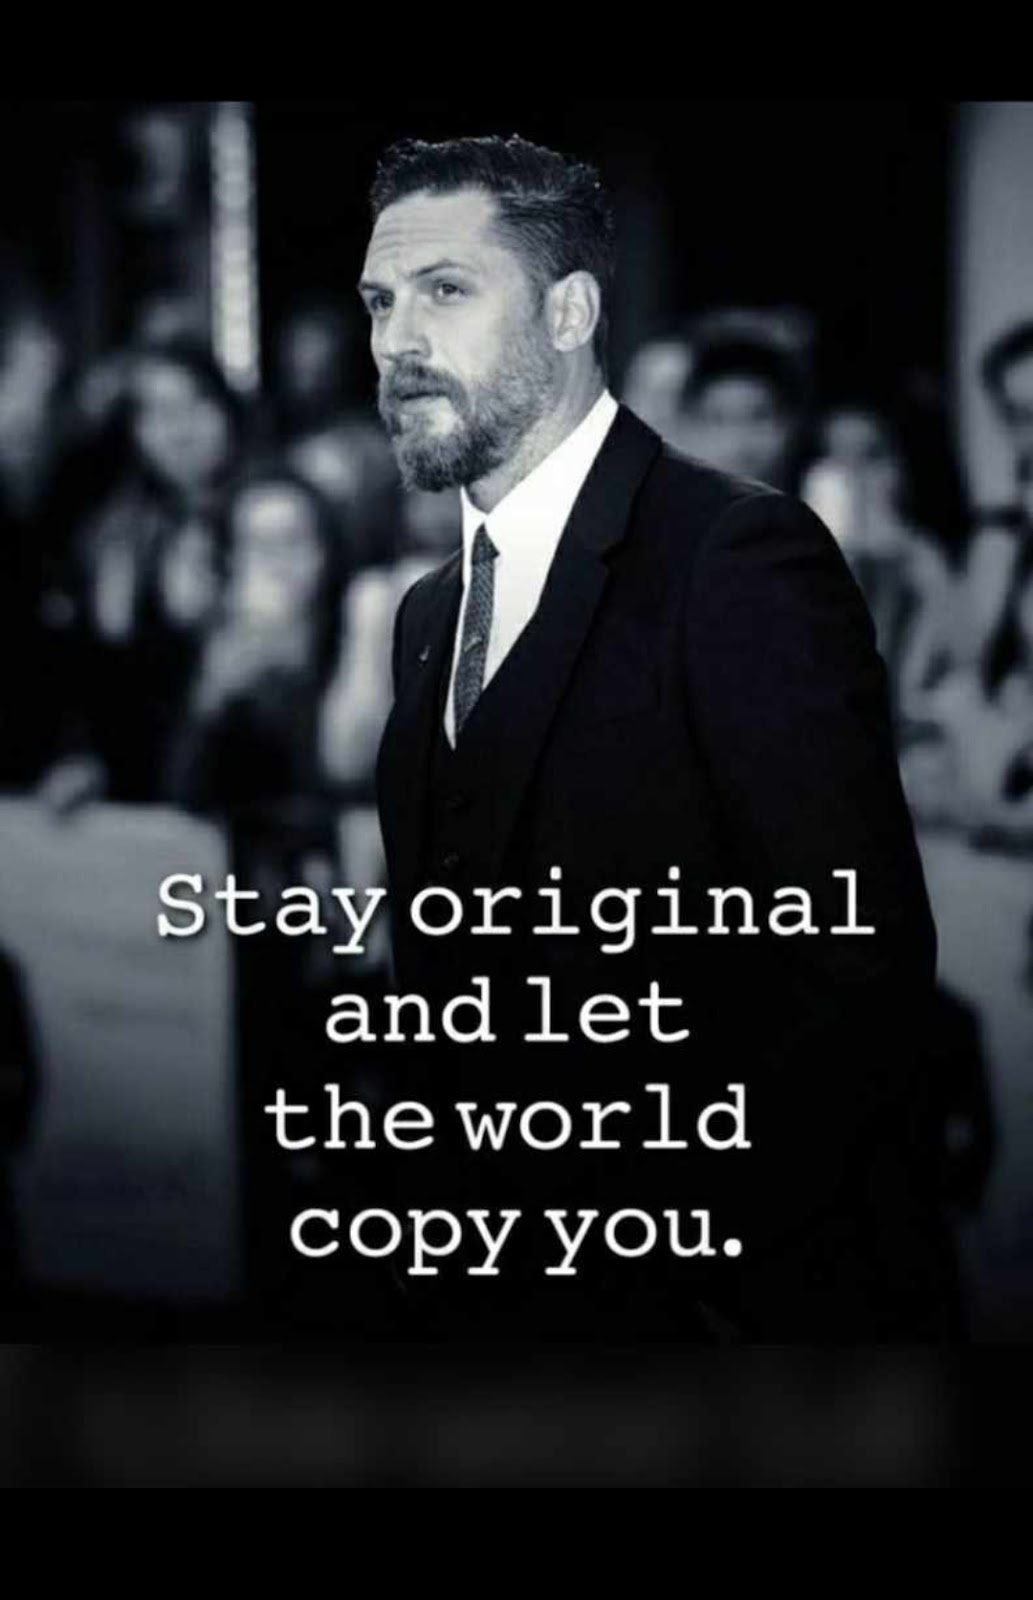 Good morning message and status: Stay original and world will copy you